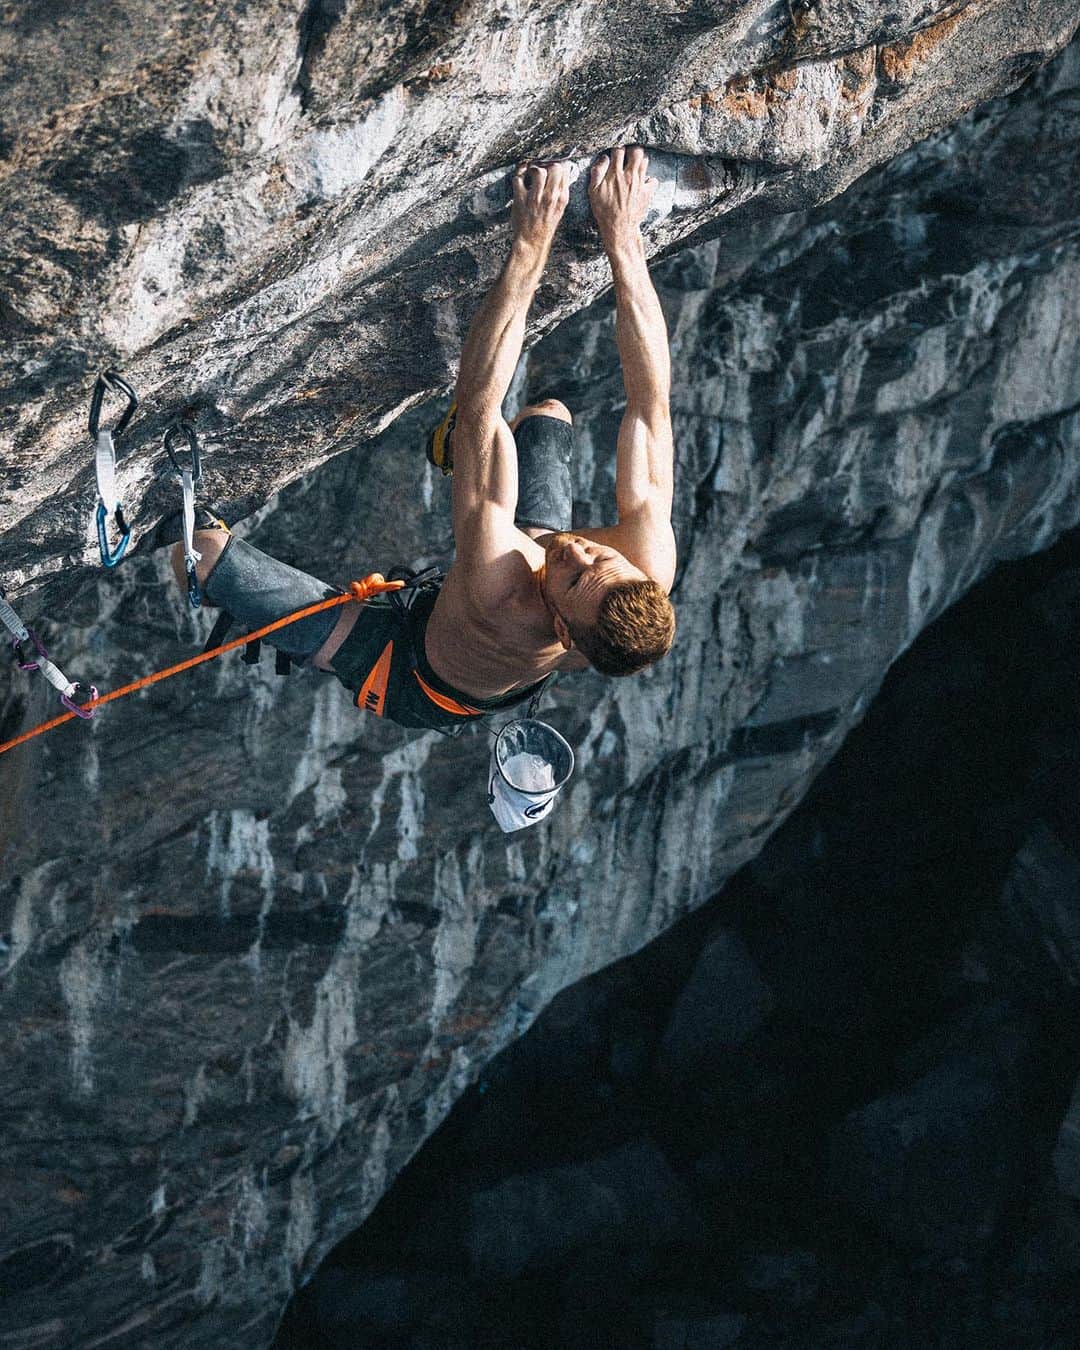 ヤコブ・シューベルトのインスタグラム：「B.I.G. [9c] Took me a while to sort out my thoughts about my most important ascent so far.  I’d like to start with a huge shoutout to @adam.ondra for bolting this incredible line and inviting me to try it with him. It was such a cool process and in the end it does feel like a team ascent to me, since we helped each other so much and figured out the route much quicker that way. I‘d have never been able to send this beast without you, Adam and fully appreciate the effort that goes into finding and bolting such a king line 🙏 Without a doubt, B.I.G is 5 stars and I can’t wait for more people to try it!   My reflections regarding the grade: When we started trying this route last year, I initially thought it could very easily be 9c, but after making a lot of progress very quickly and feeling pretty close on it after 2 weeks already, Adam and me both were pretty confident it’ll be 9b+. But somehow we tried a lot more and didn’t make much progress and in hindsight I don’t even think we were actually that close, because we were mostly struggling to stick the crux move and believed to be in for the send once that happens. Knowing how my attempts unfolded this season puts things into a different perspective, as I stuck that move four times without sending.   My reference for 9b+ is Perfecto Mundo which I sent in about 3 weeks of work and which felt way easier to me than B.I.G. The only other guy who tried B.I.G. a lot is Adam and I’m happy he shared all his opinions with me which definitely helped me draw my conclusions. I felt at a point where I had found the most efficient way possible for me, the whole route was worked out perfectly and I didn’t see any room for improvement. So all that it came down to was my physical & mental shape which I think are very good right now. Given the current information that I have and considering Adam’s opinion, it feels right to propose 9c and I’m looking forward to see what time will tell. You can find some more specific thoughts on my profile on @thecrag_worldwide   Anyways, the one thing I know for sure is that it will always be one of my most memorable ascents ❤️  Photo by @alpsolut.pictures and @moritz.klee」